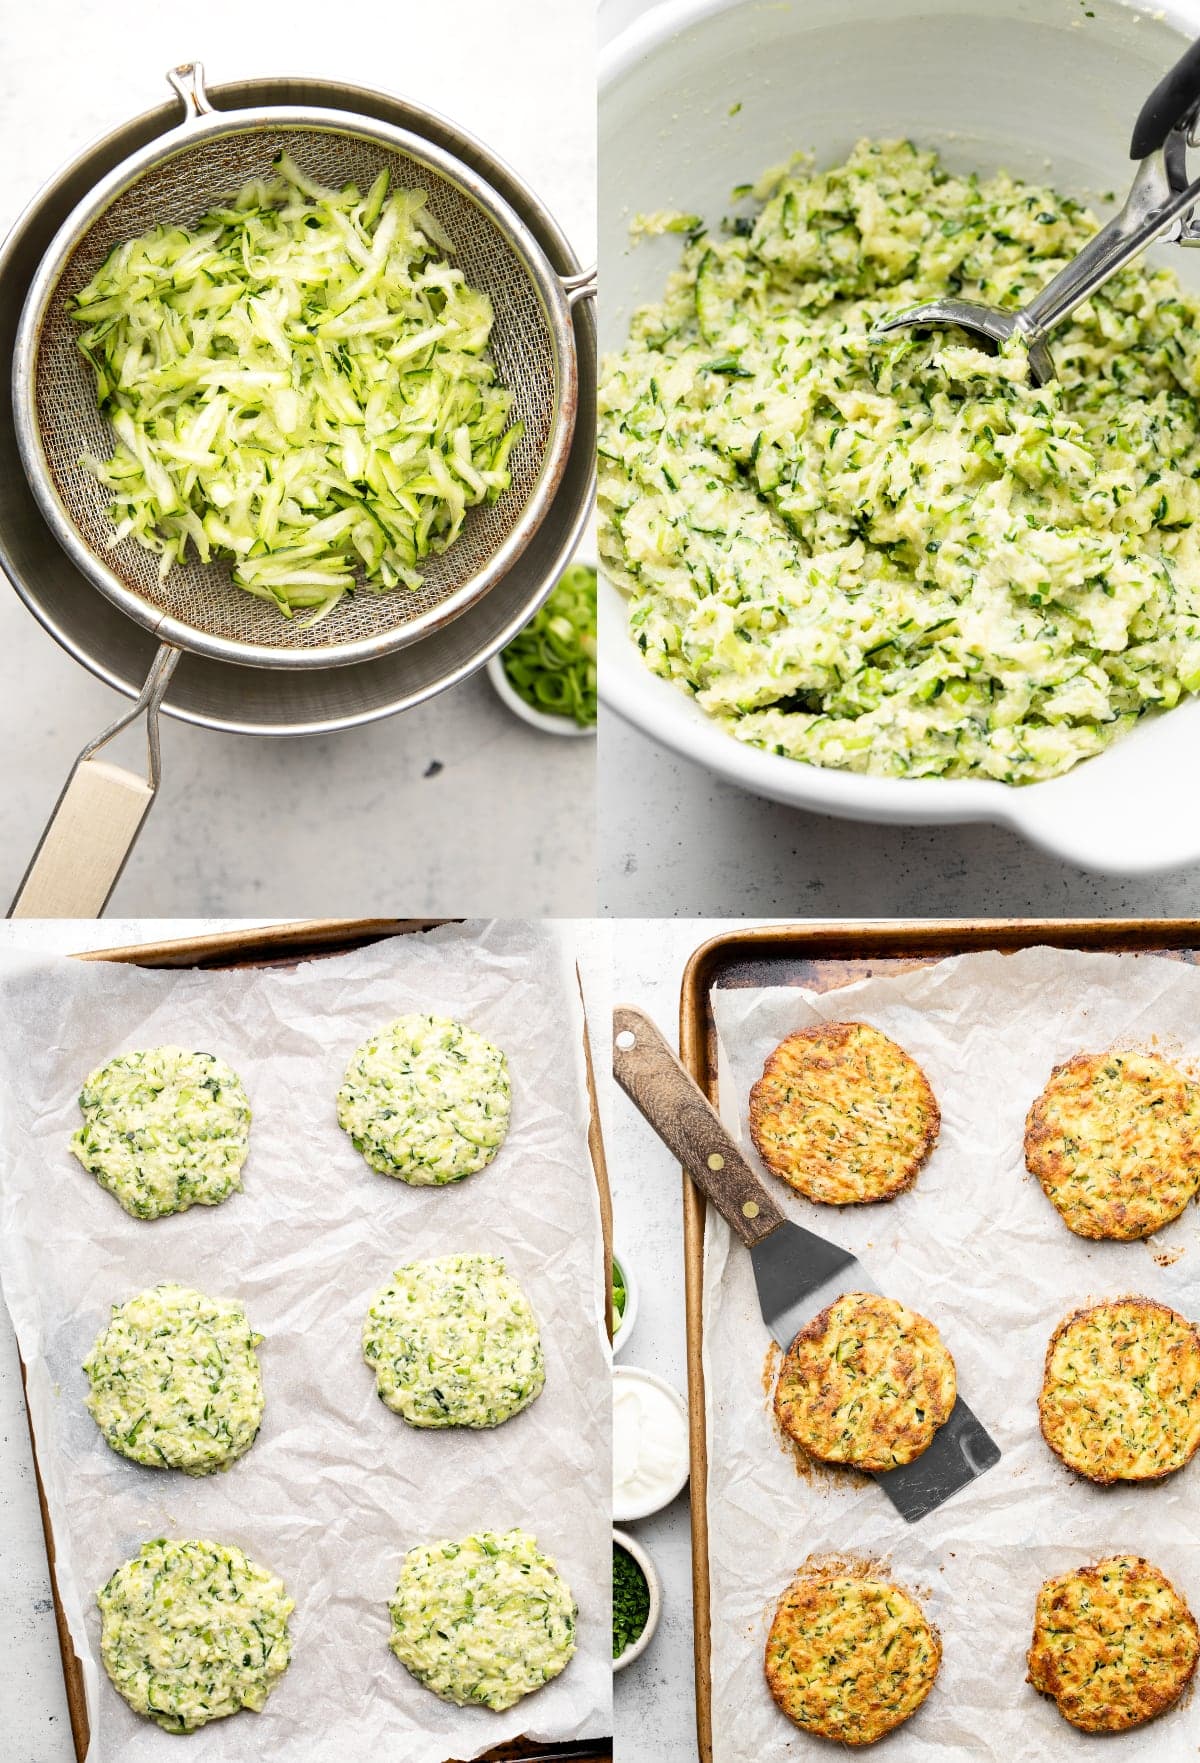 Step by step photos for how to make zucchini fritters in the oven.